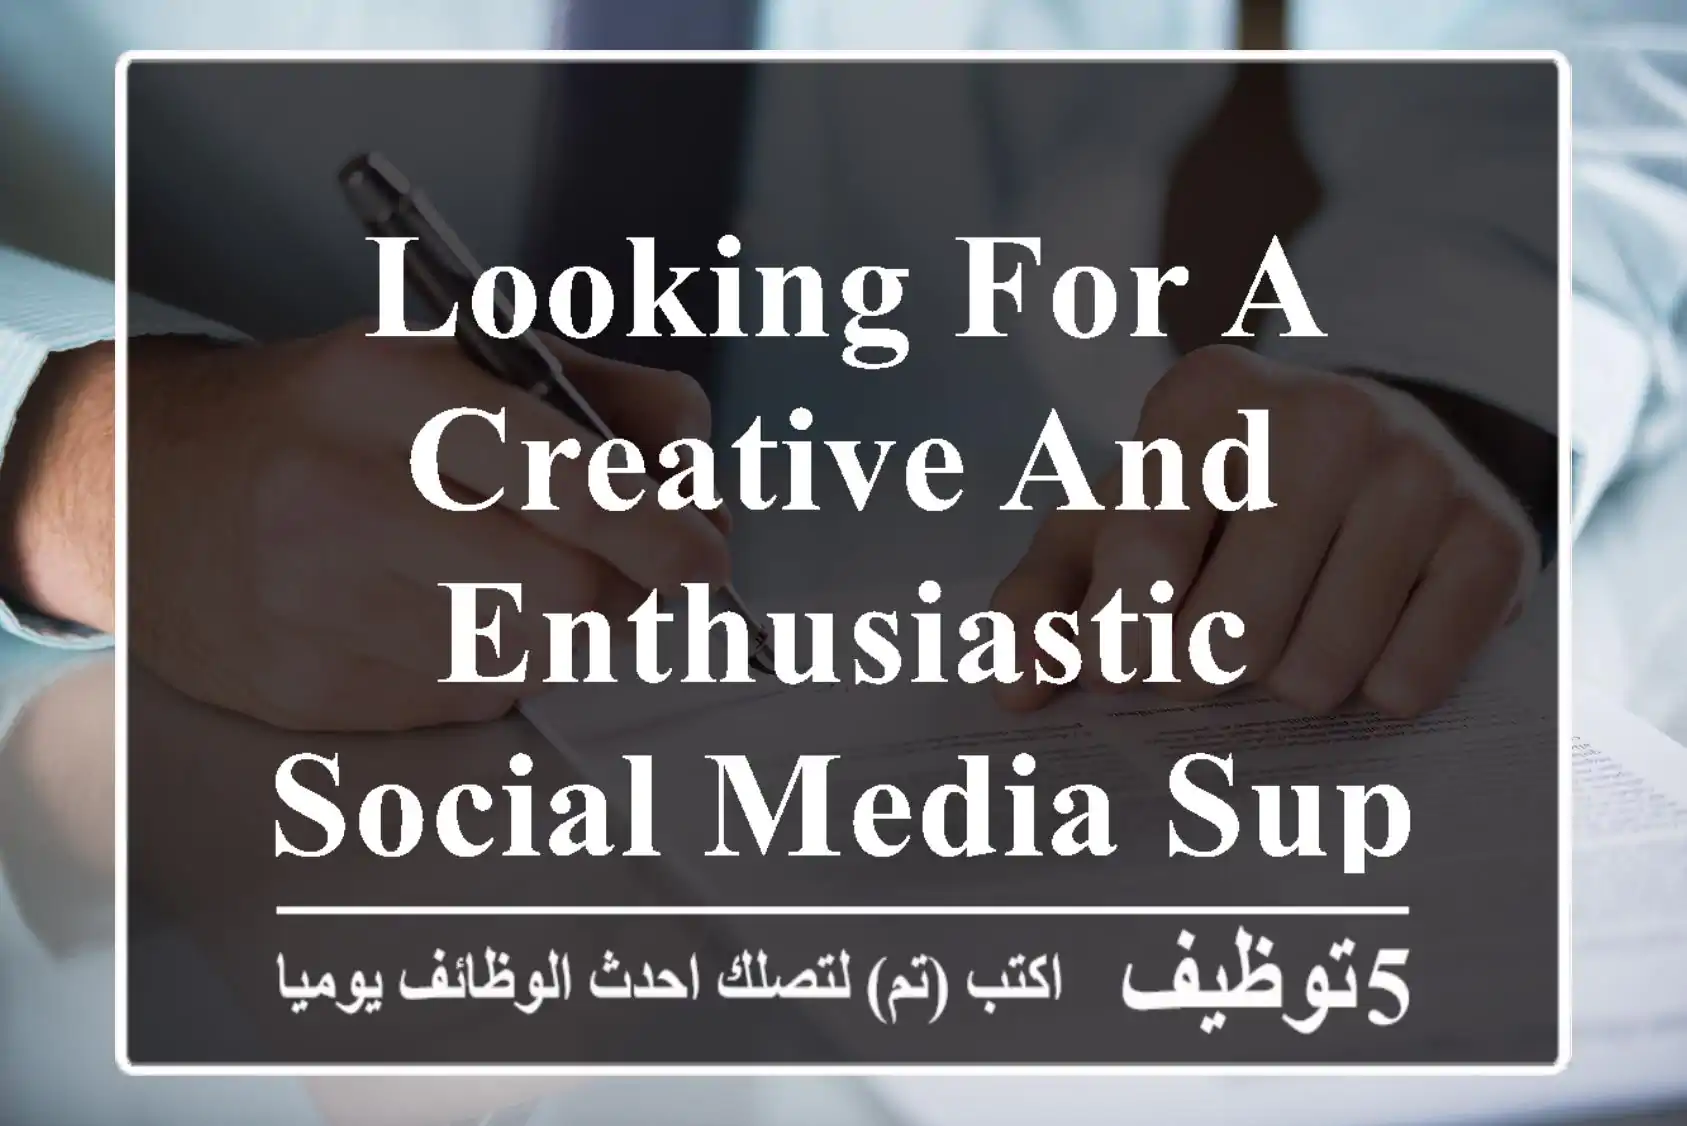 looking for a creative and enthusiastic social media supervisor to join our team. if you have ...